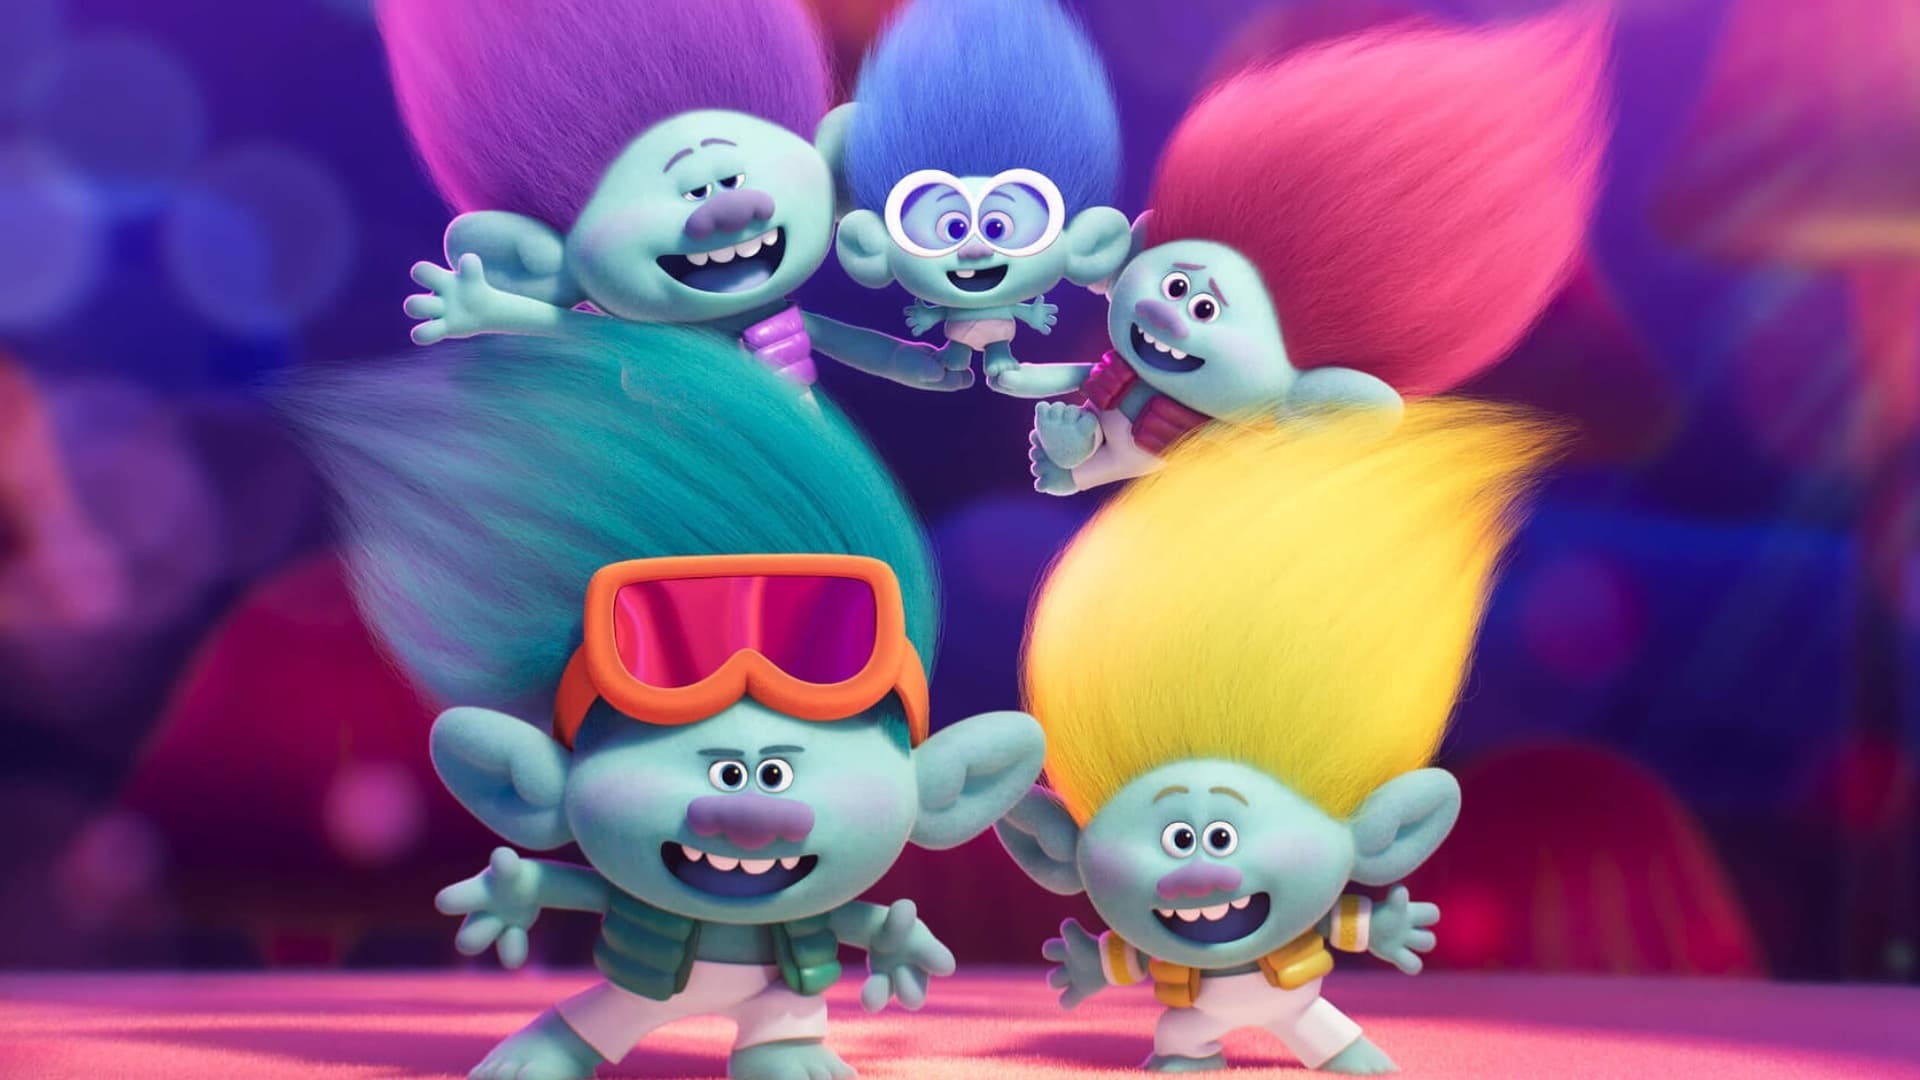 "Trolls Band Together" is coming to theaters in the United States on Nov. 18.